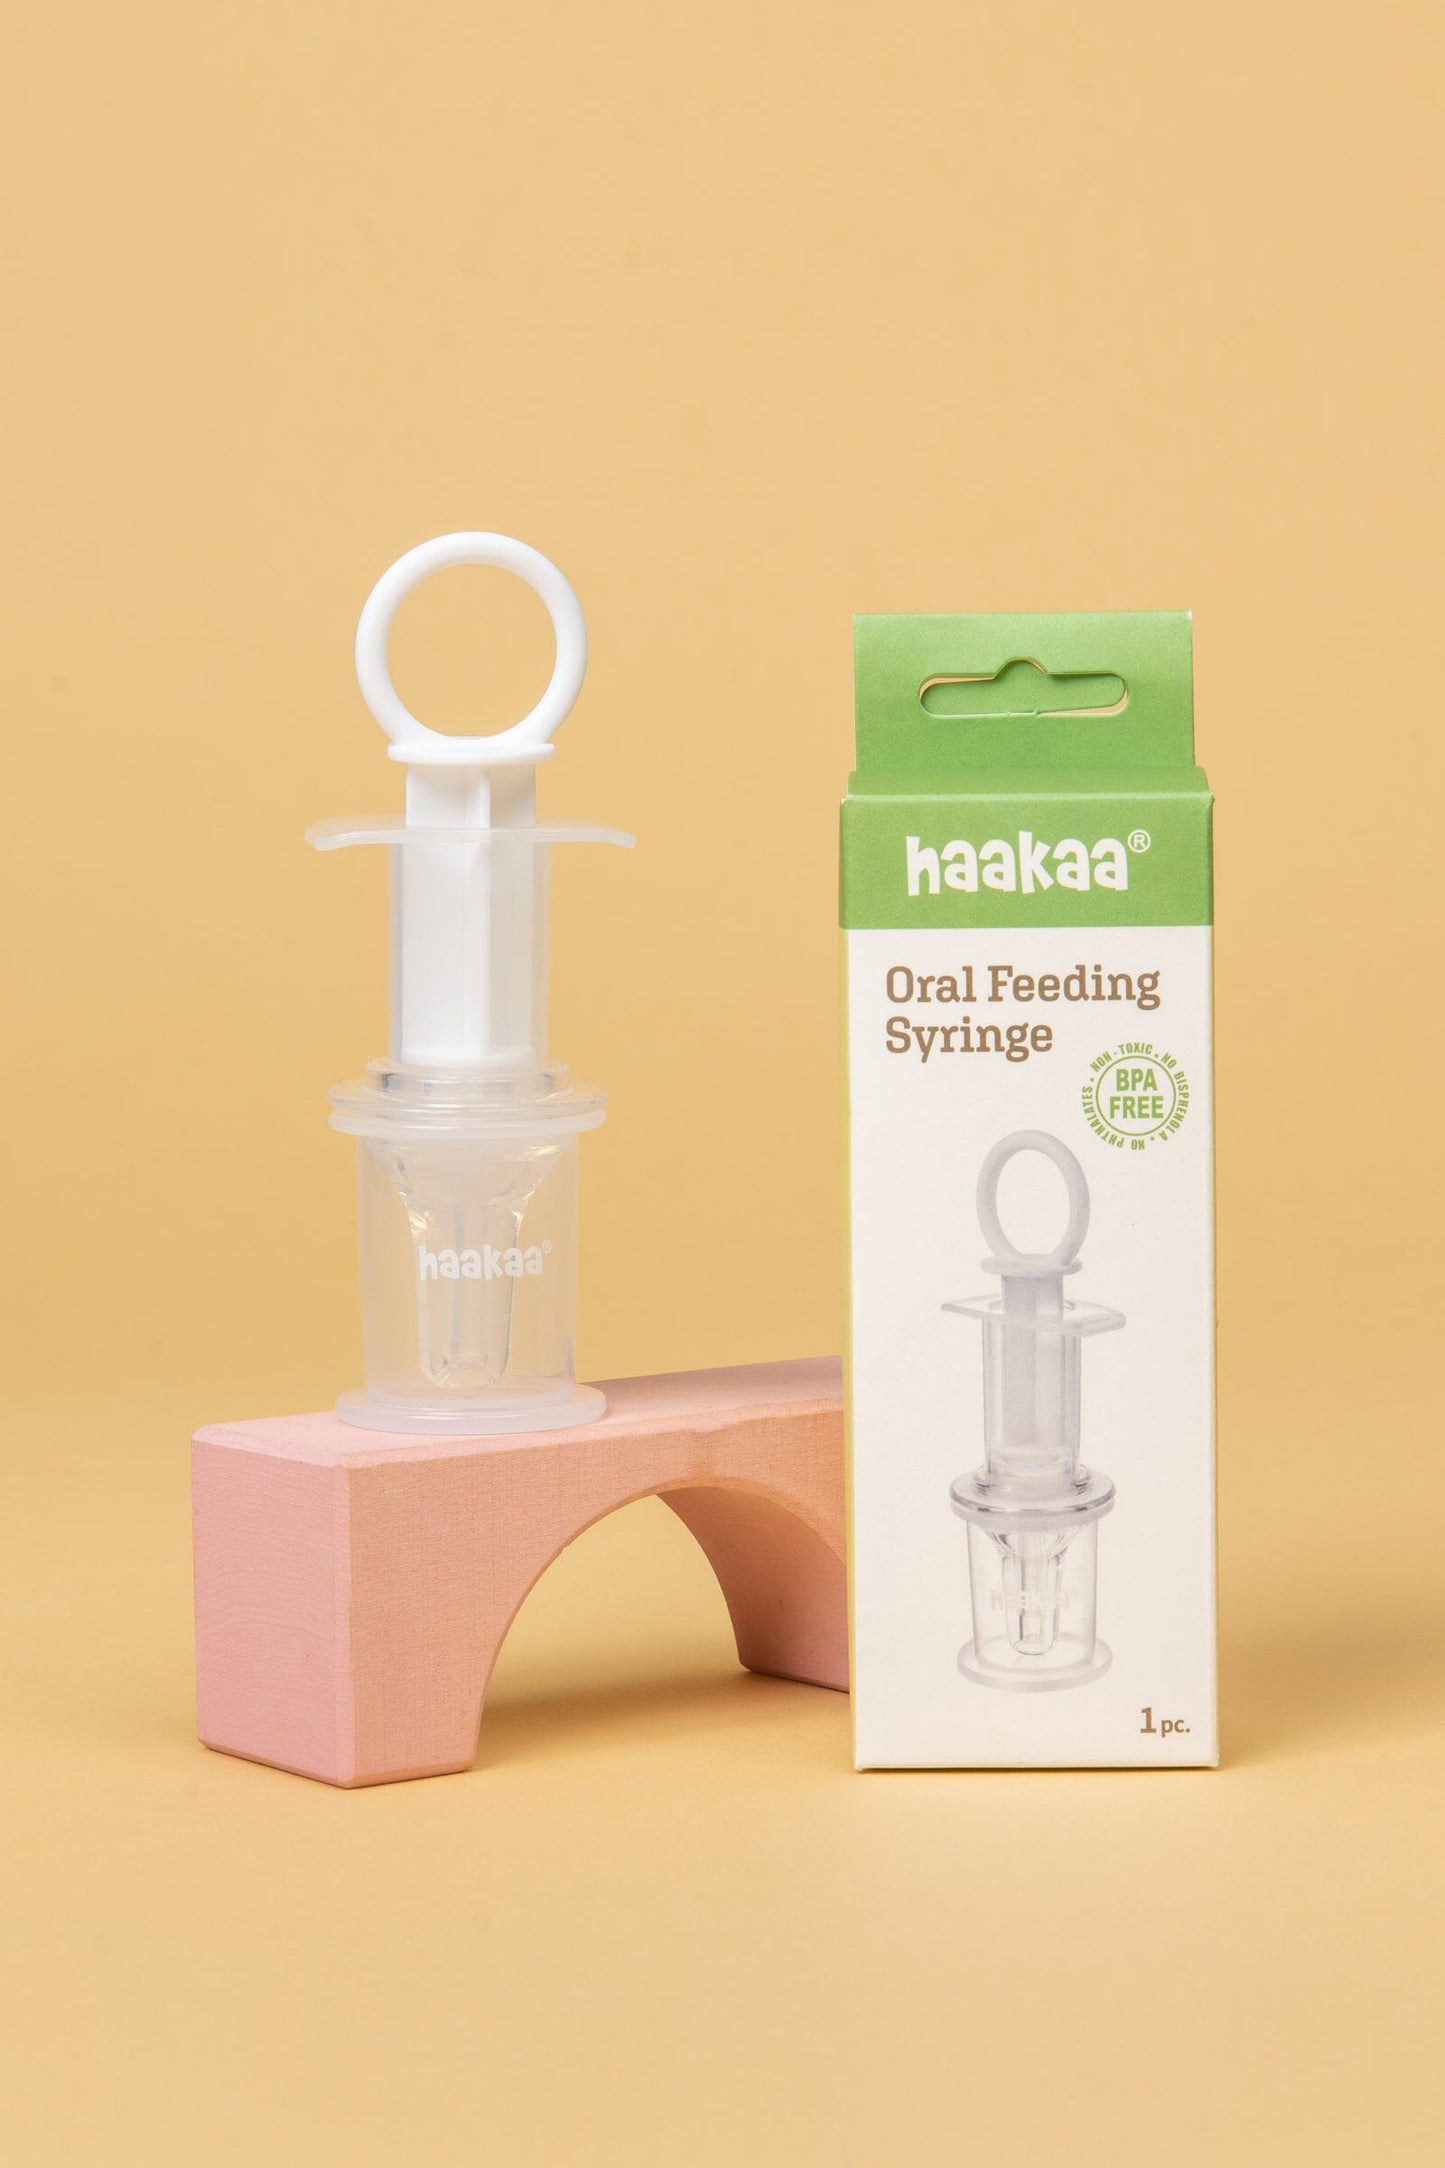 Haakaa Oral Feeding Syringe – My Favourite Things Shop